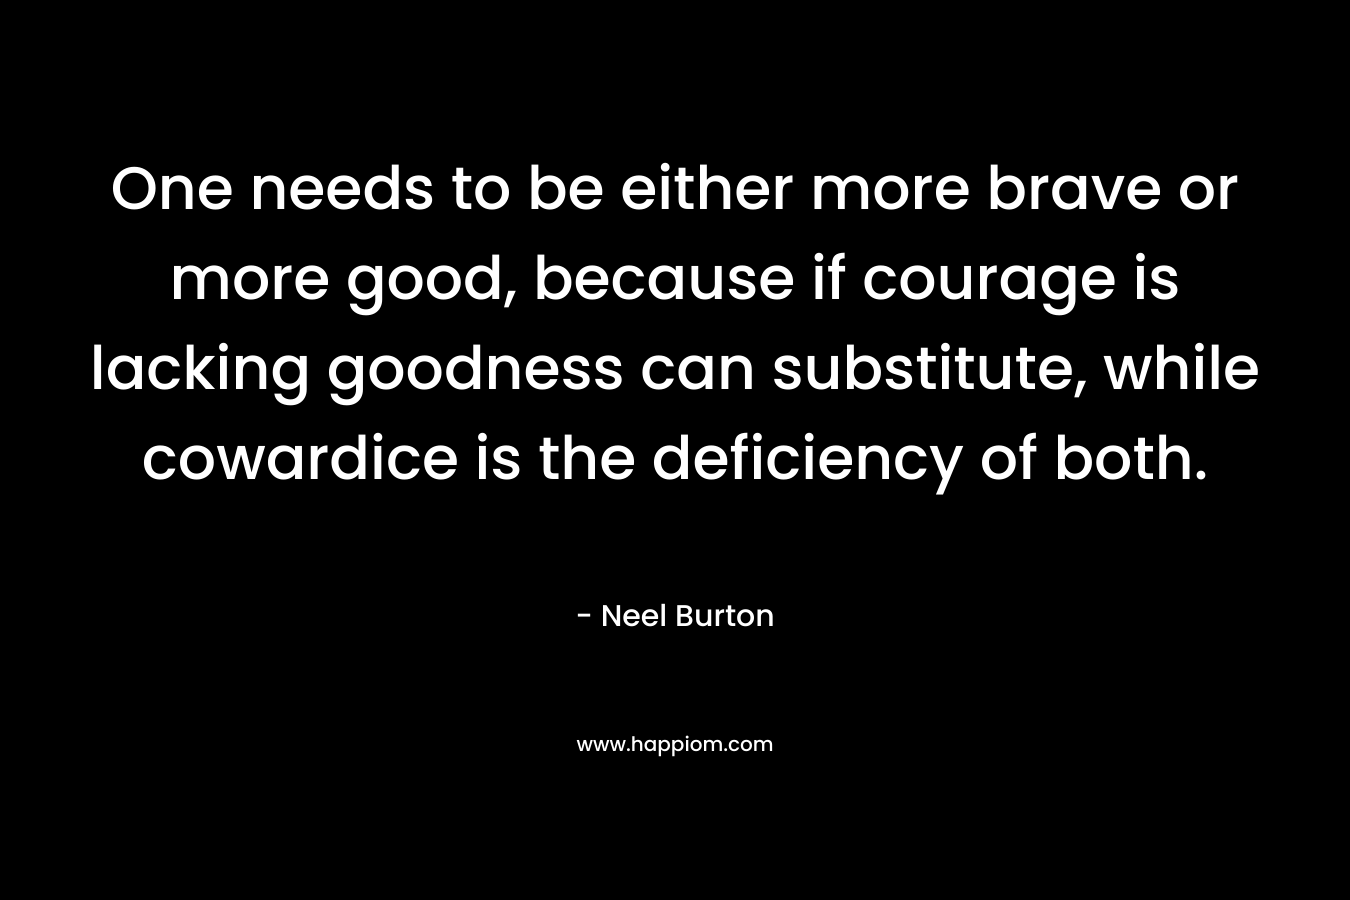 One needs to be either more brave or more good, because if courage is lacking goodness can substitute, while cowardice is the deficiency of both.